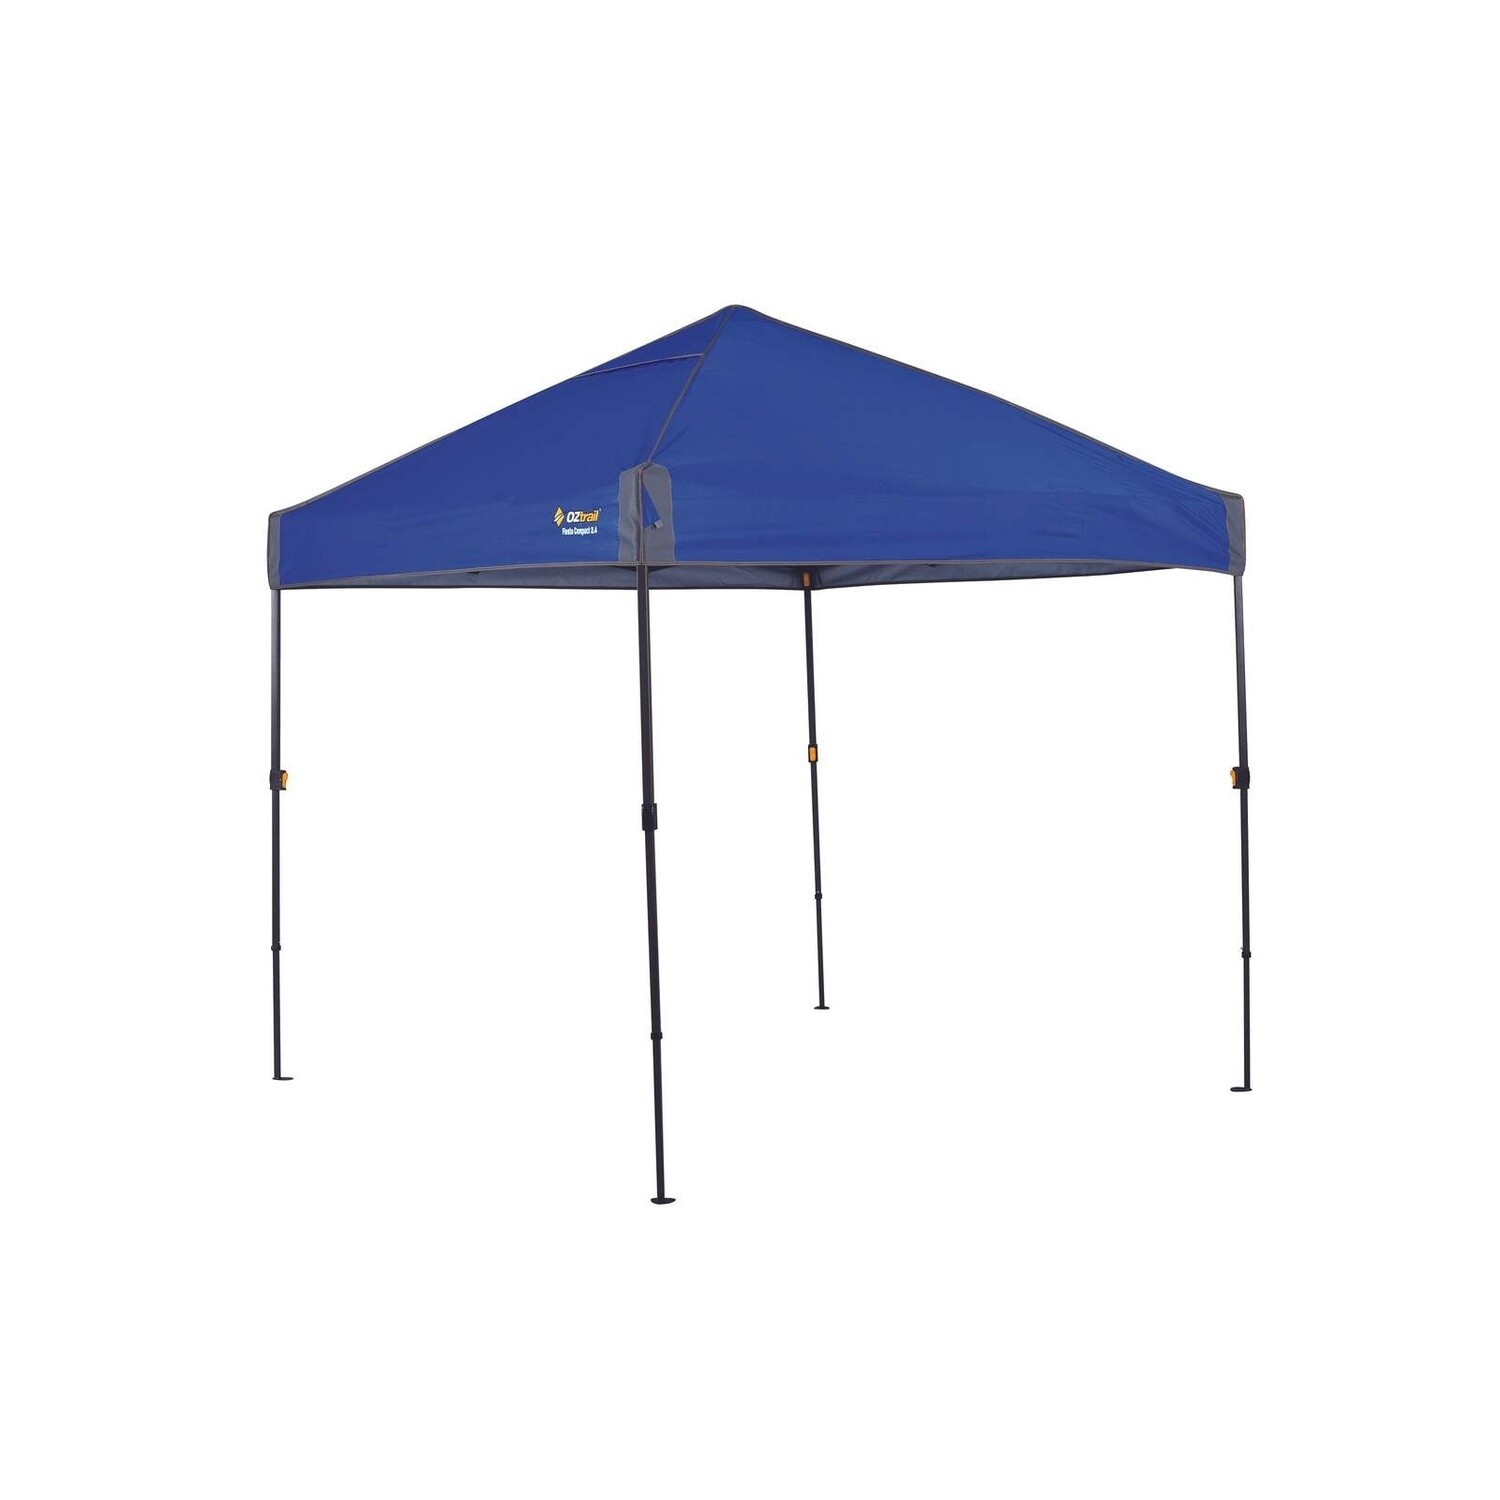 Ozrail Compact Gazebo 2.4 Blue (Instore Only)